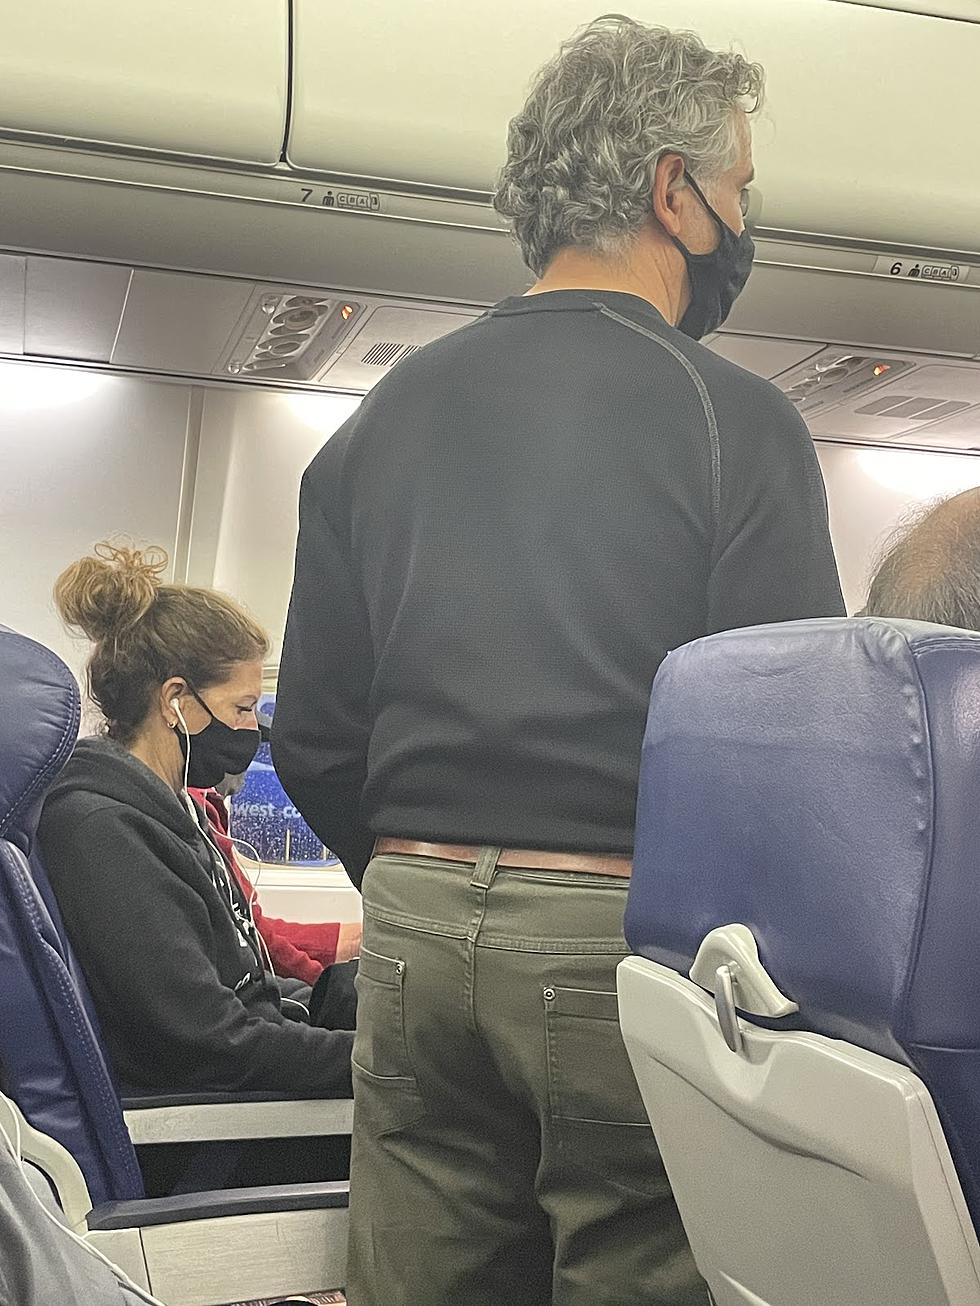 WNY Couple Refuses To Let People Sit On Flight